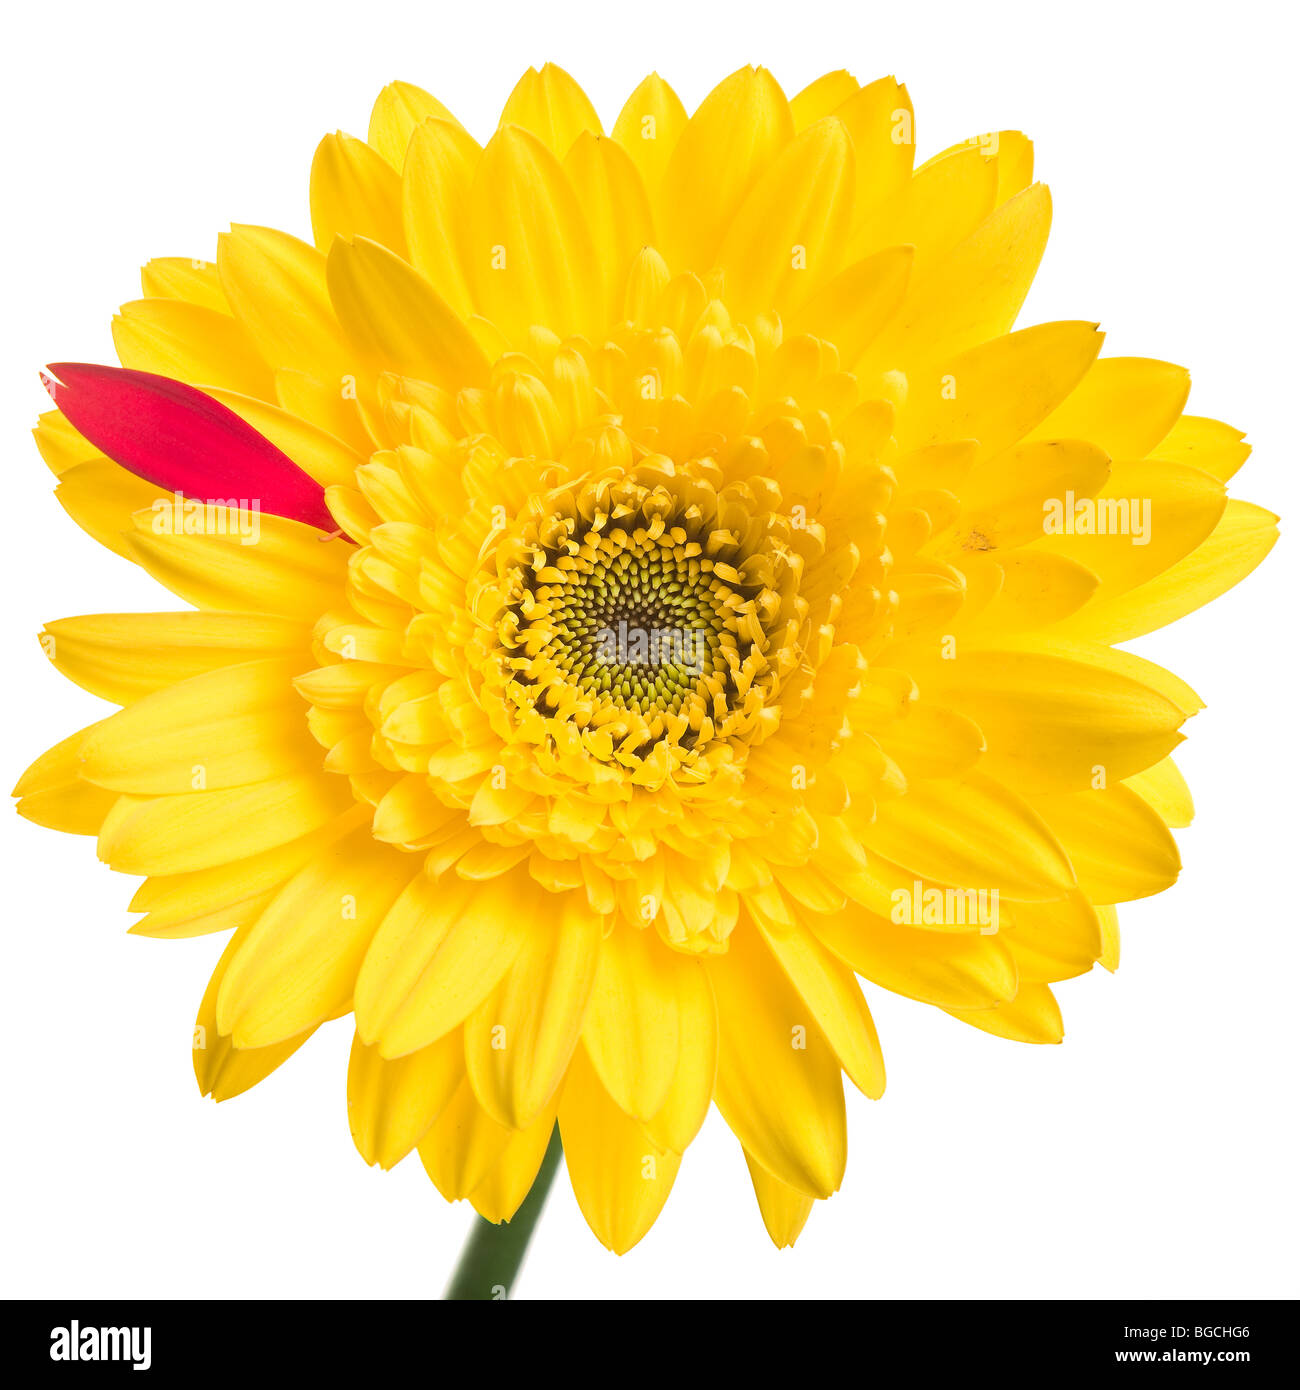 Yellow Gerber daisy with one red petal over a white background. Studio isolated! Stock Photo